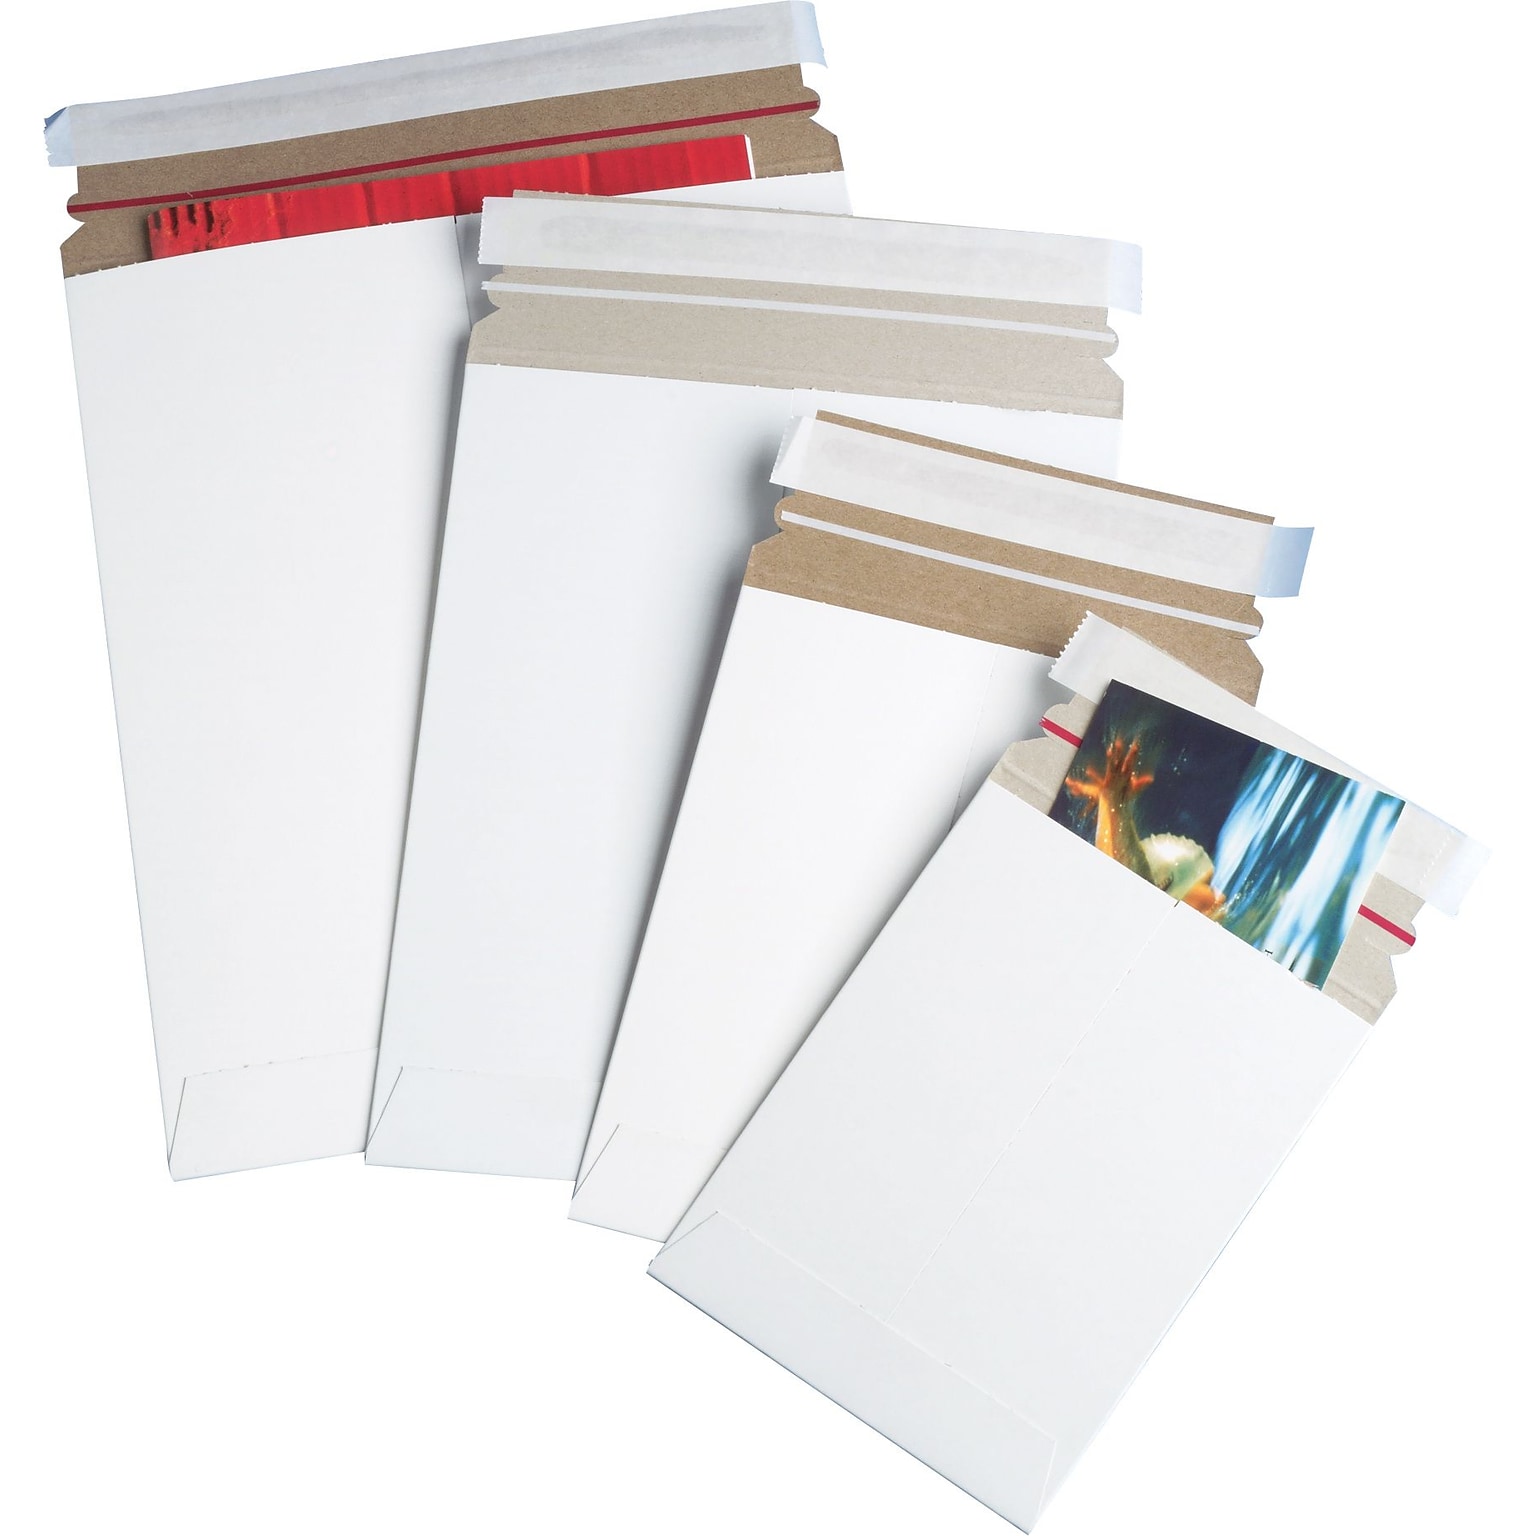 StayFlat Mailers, 7 x 9, White, 100/Case